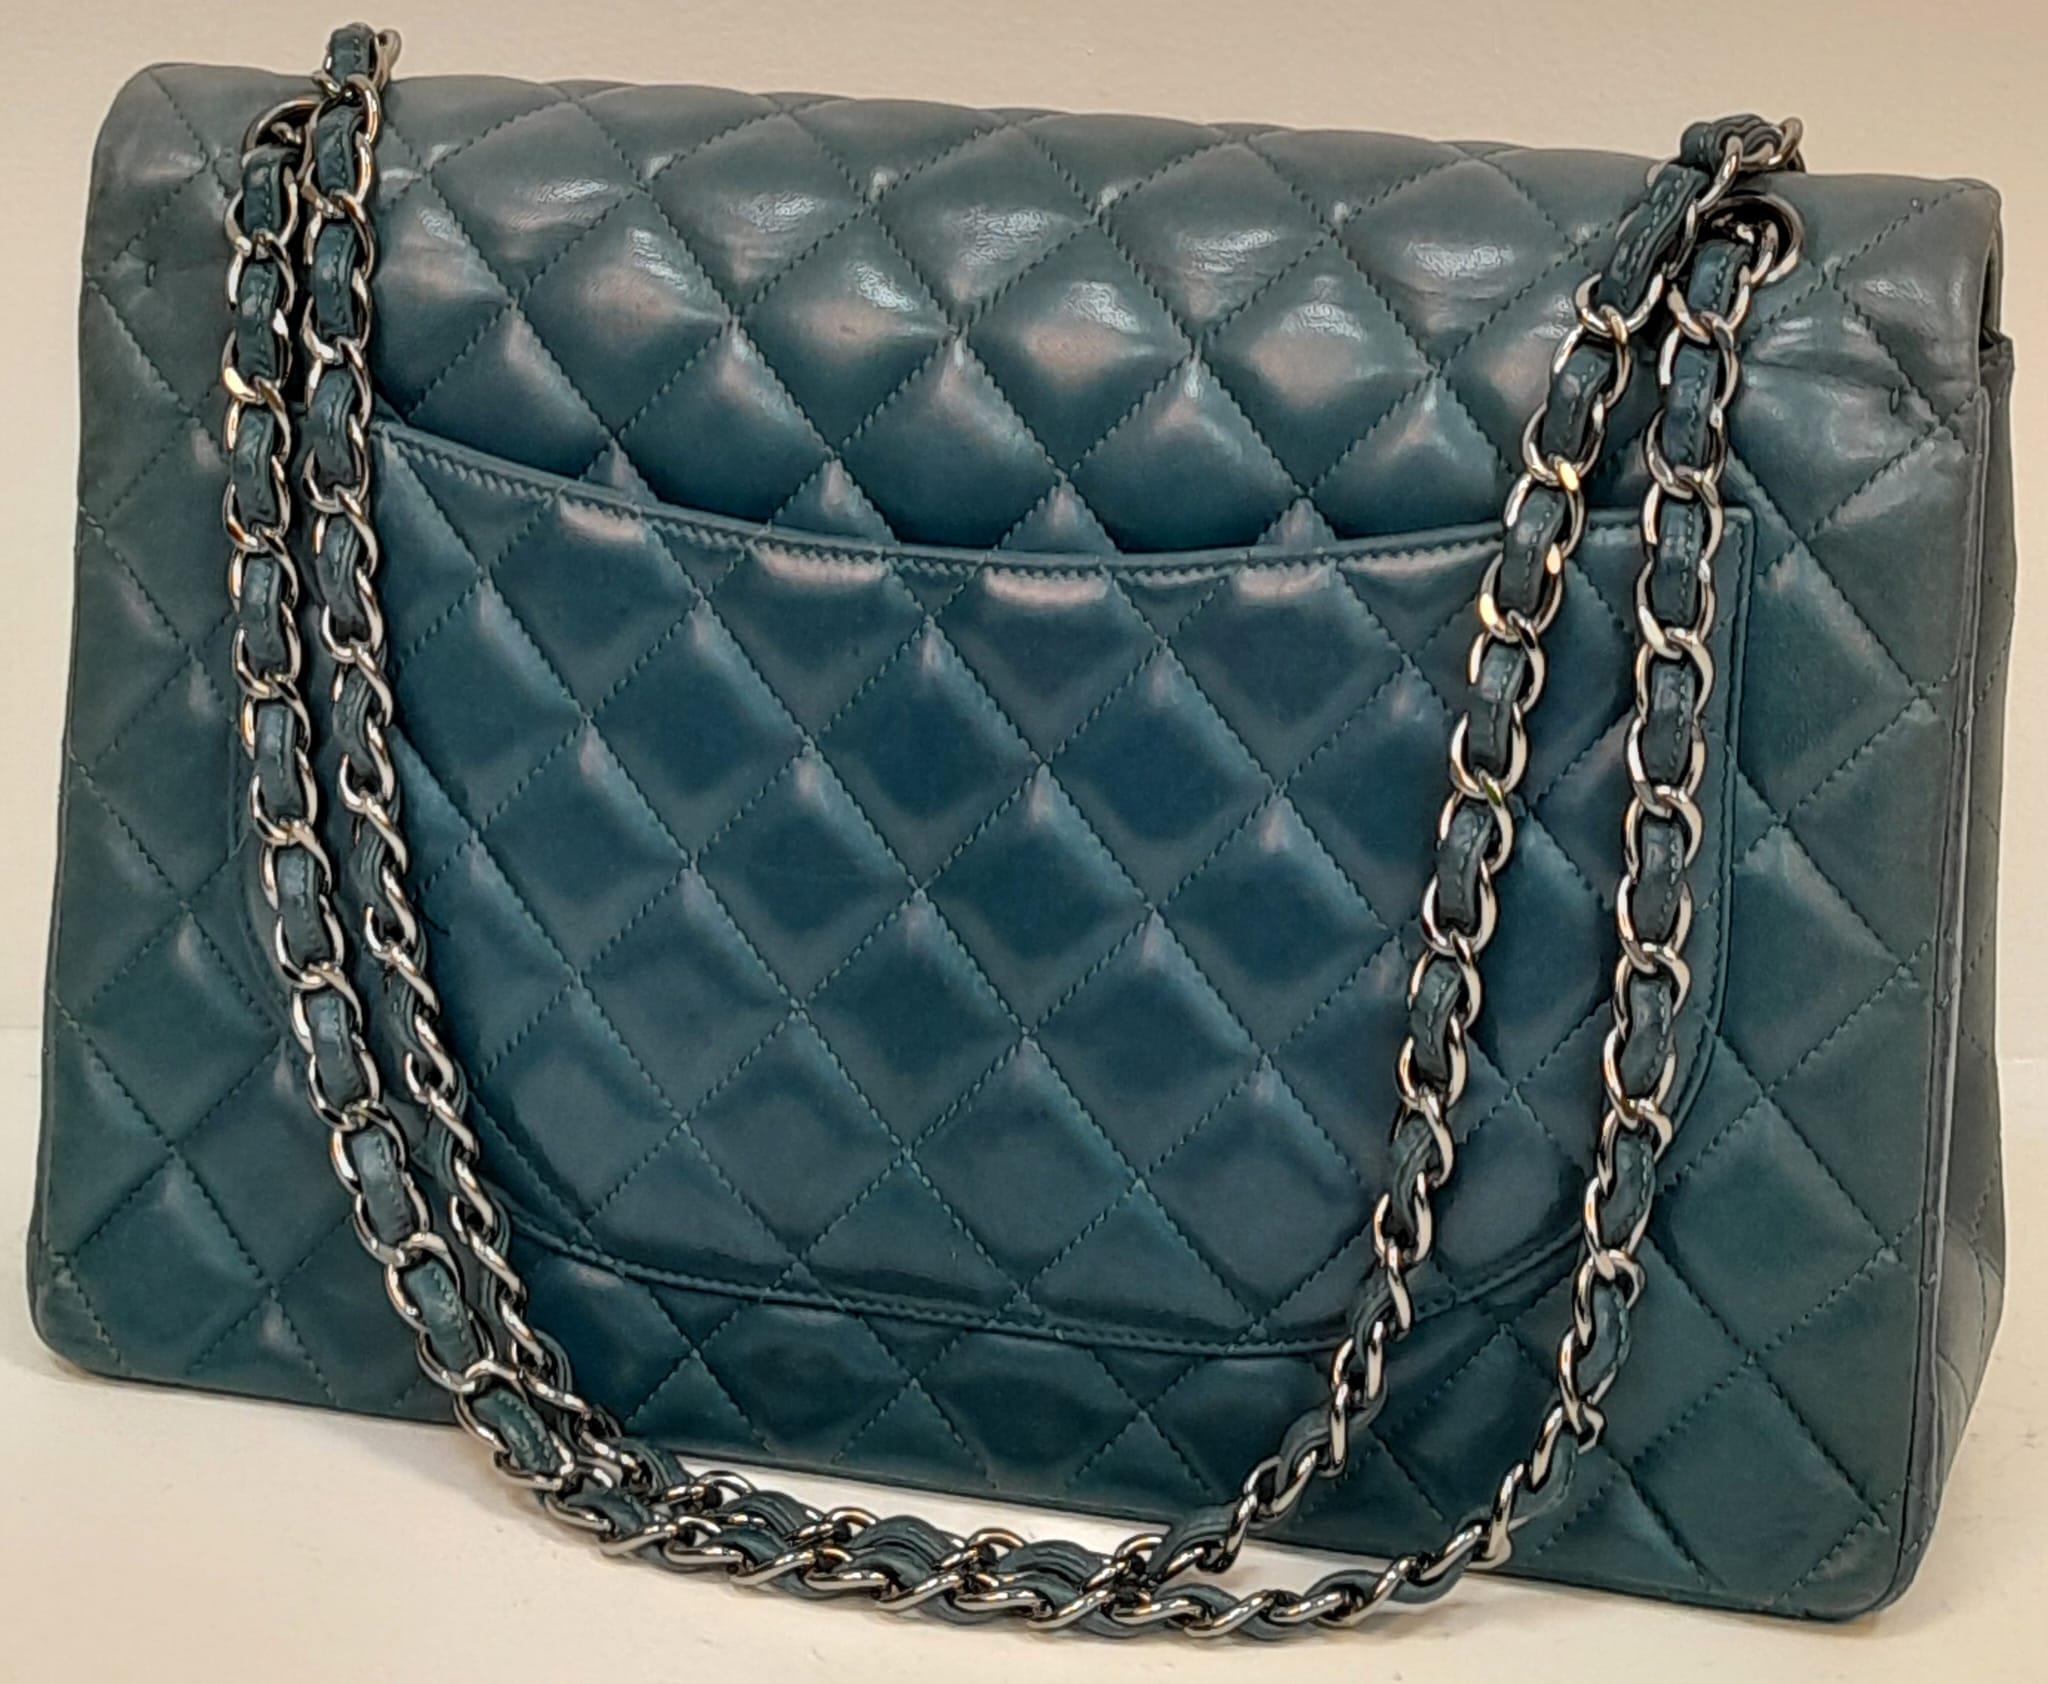 A Chanel Teal Jumbo Classic Double Flap Bag. Quilted leather exterior with silver-toned hardware, - Image 4 of 14